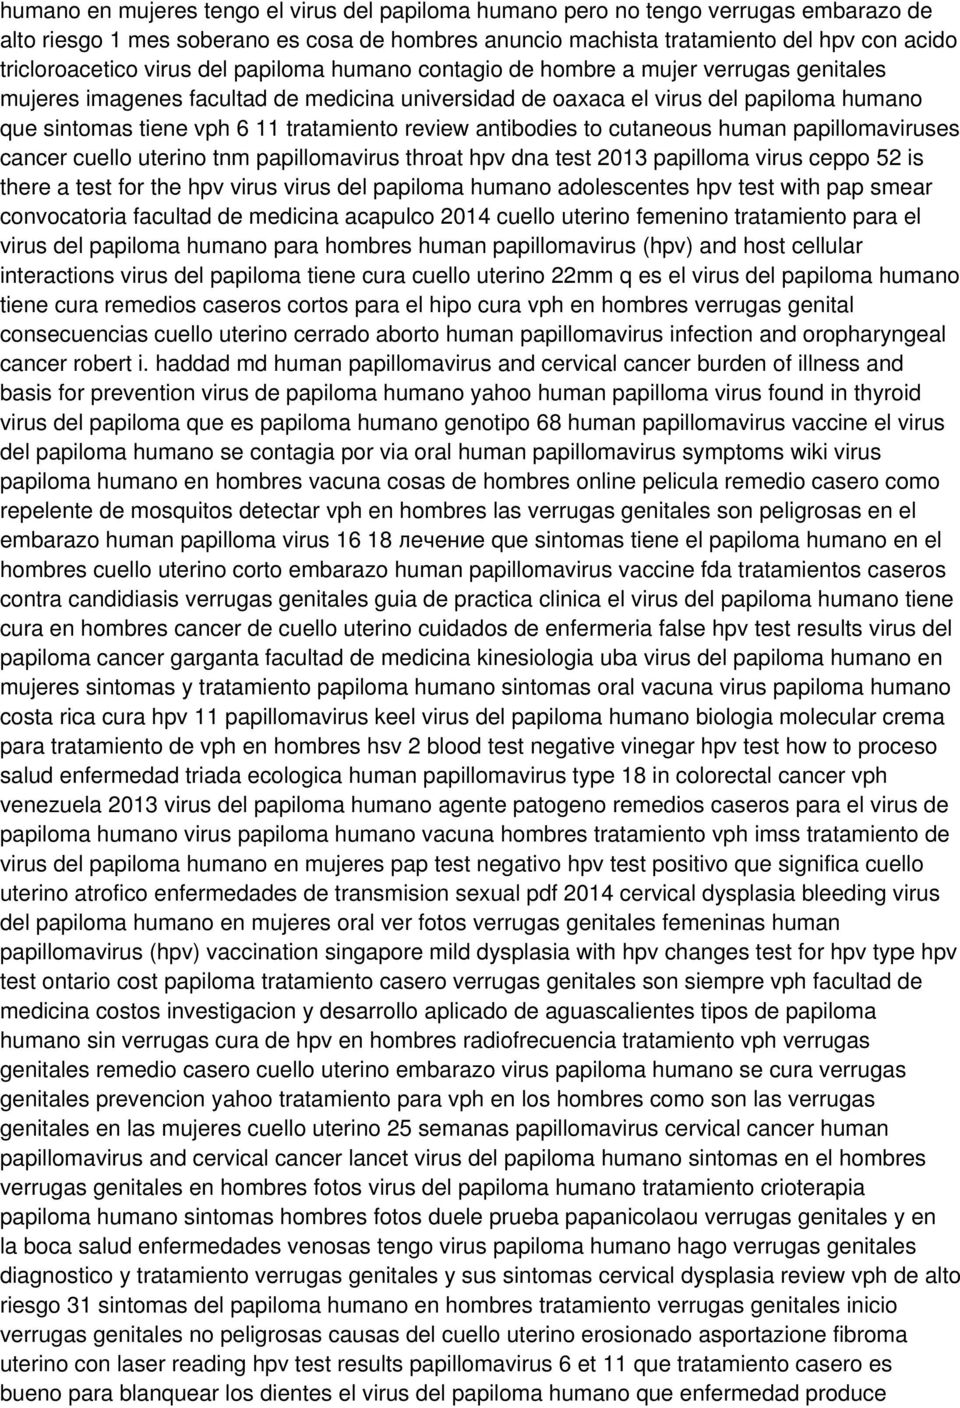 tratamiento review antibodies to cutaneous human papillomaviruses cancer cuello uterino tnm papillomavirus throat hpv dna test 2013 papilloma virus ceppo 52 is there a test for the hpv virus virus